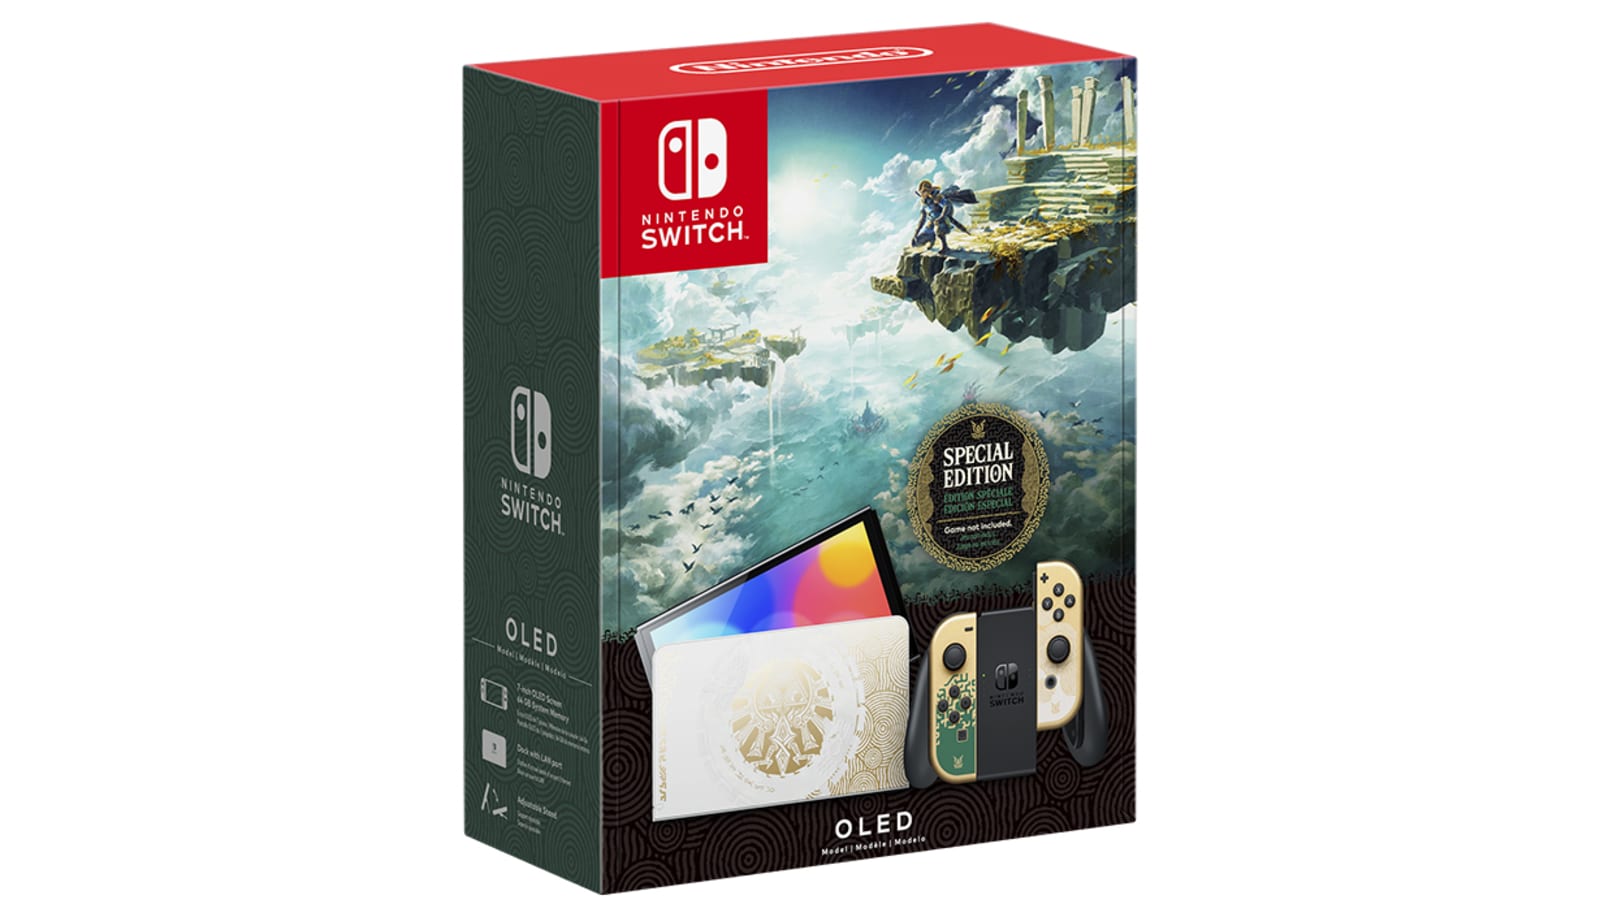 Nintendo Switch – OLED Model - The Legend of Zelda: Tears of the Kingdom Edition The Nintendo Switch – OLED Model - The Legend of Zelda: Tears of the Kingdom Edition system features a design inspired by the Legend of Zelda: Tears of the Kingdom game, including the familiar Hylian Crest from the Legend of Zelda series on the front of the dock (game not included).